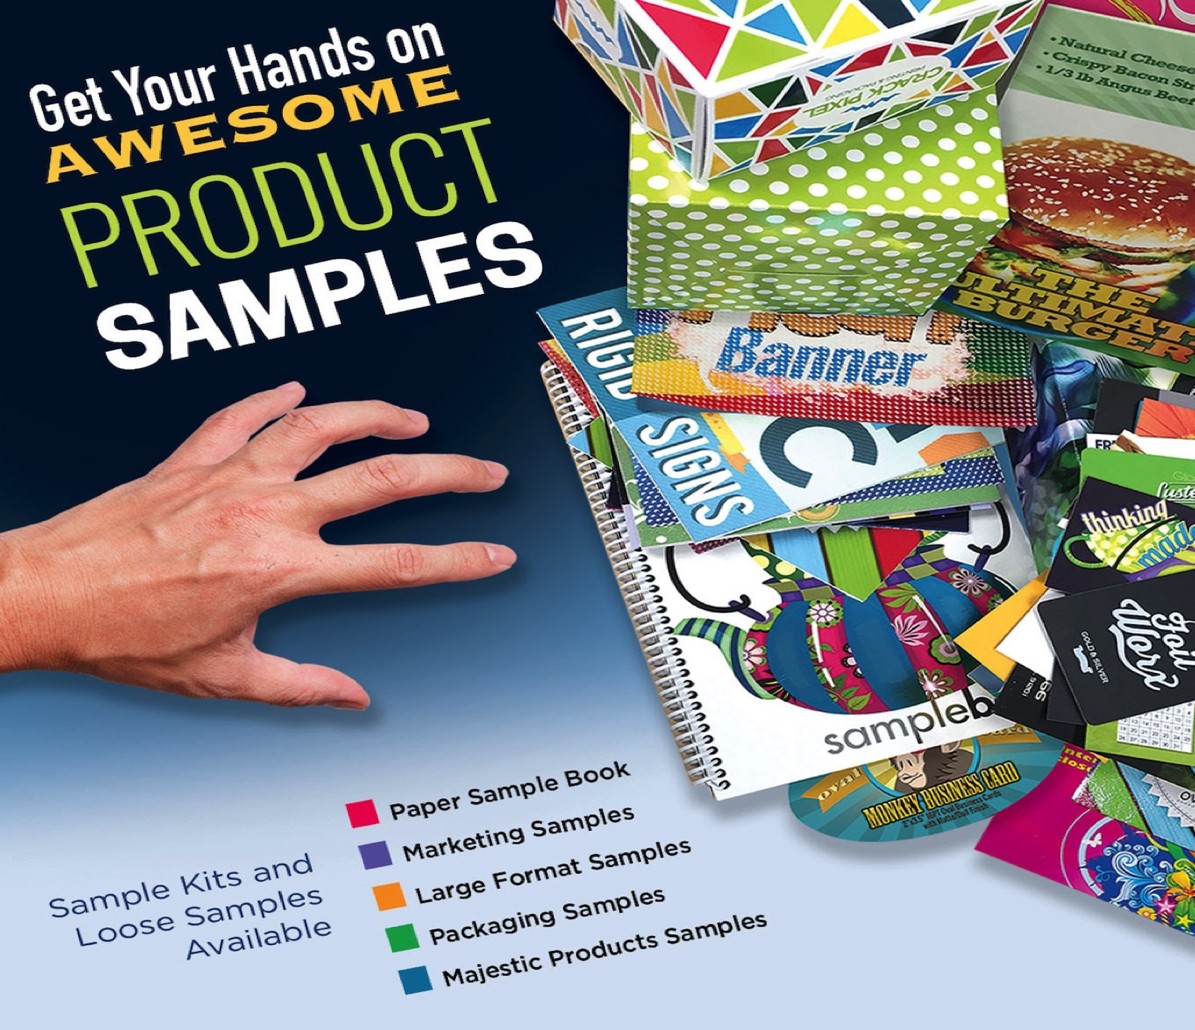 Book product samples